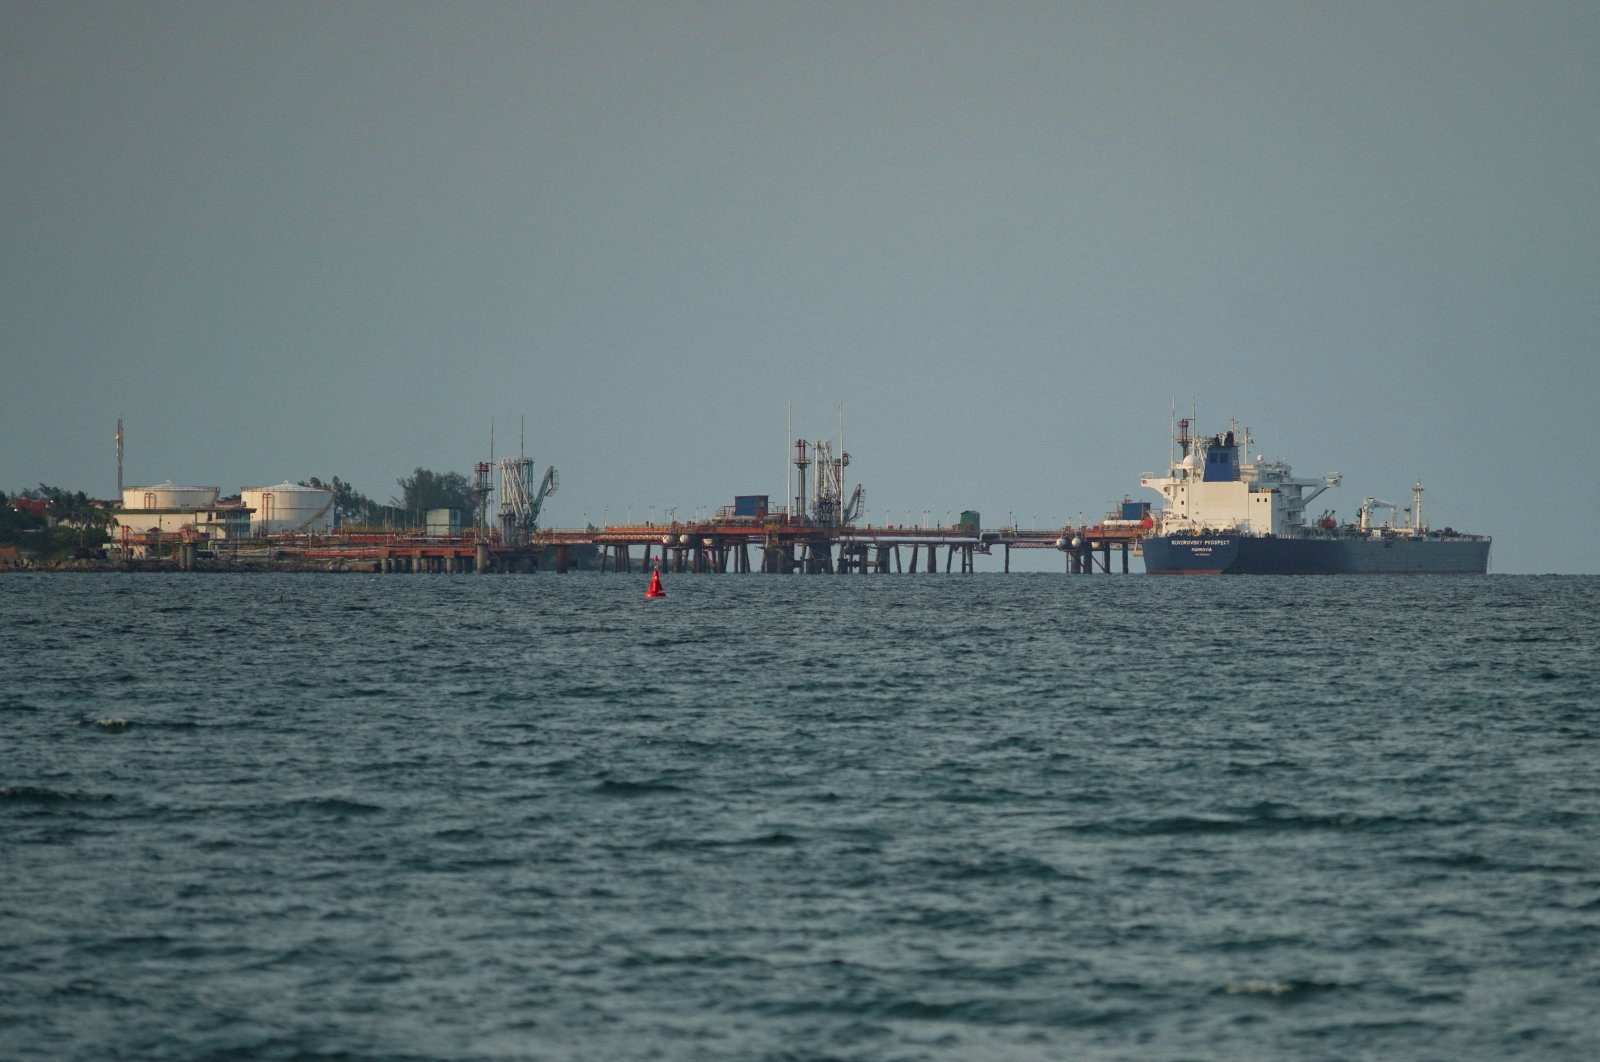 The Liberia-flagged Aframax tanker Suvorovsky Prospect discharges oil from Russia at the Matanzas terminal, in Matanzas, Cuba, July 16, 2022. (Reuters Photo)